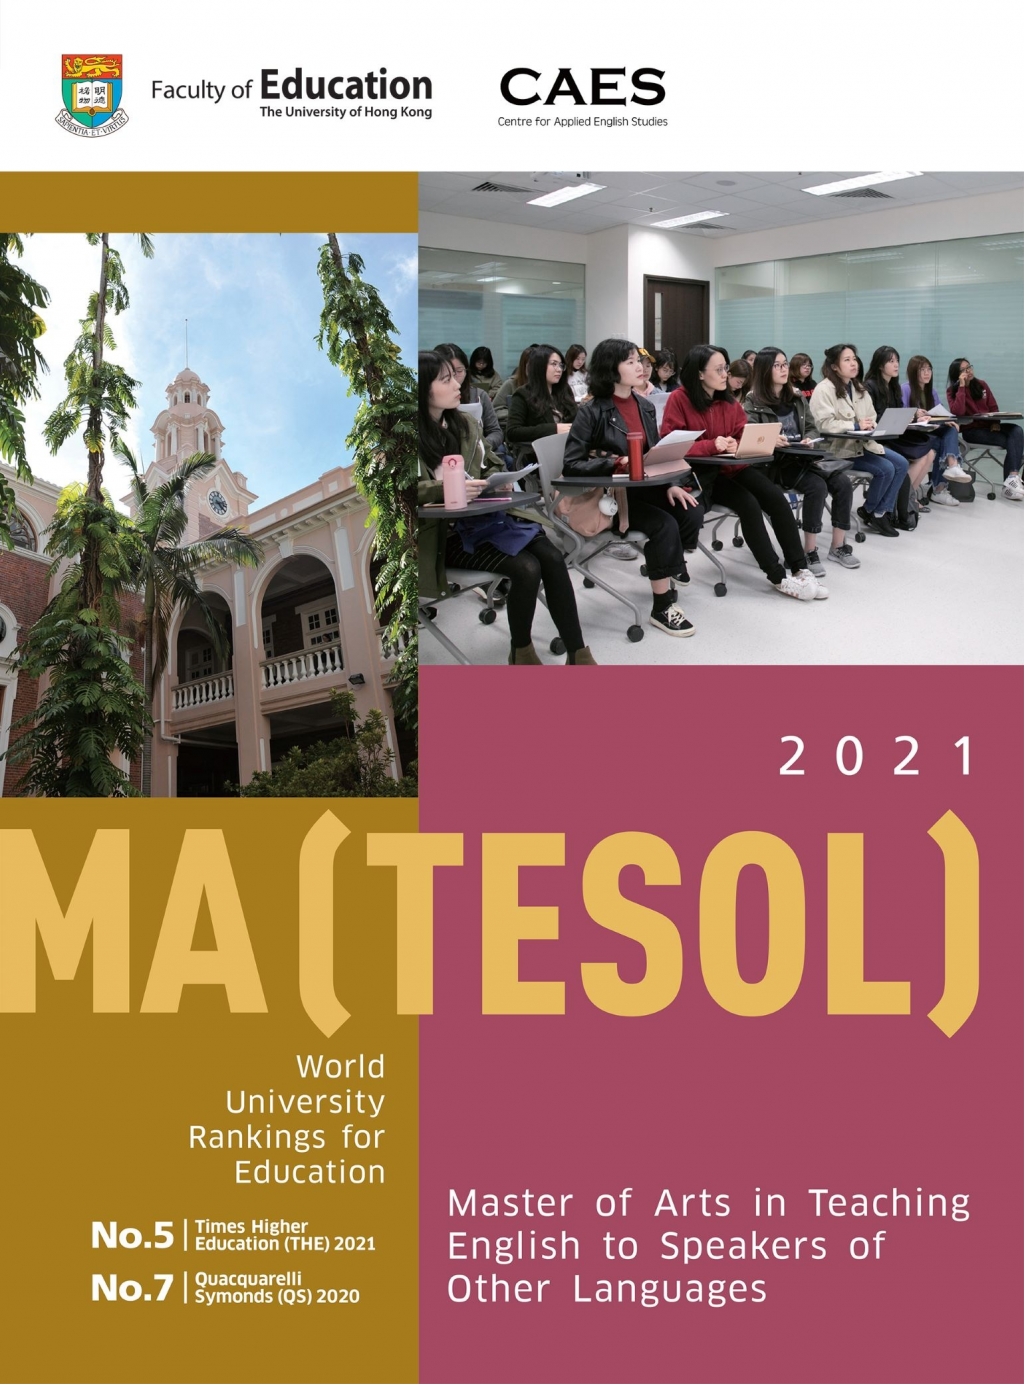 Application of Master of Arts in Teaching English to Speakers of Other Languages [MA(TESOL)]